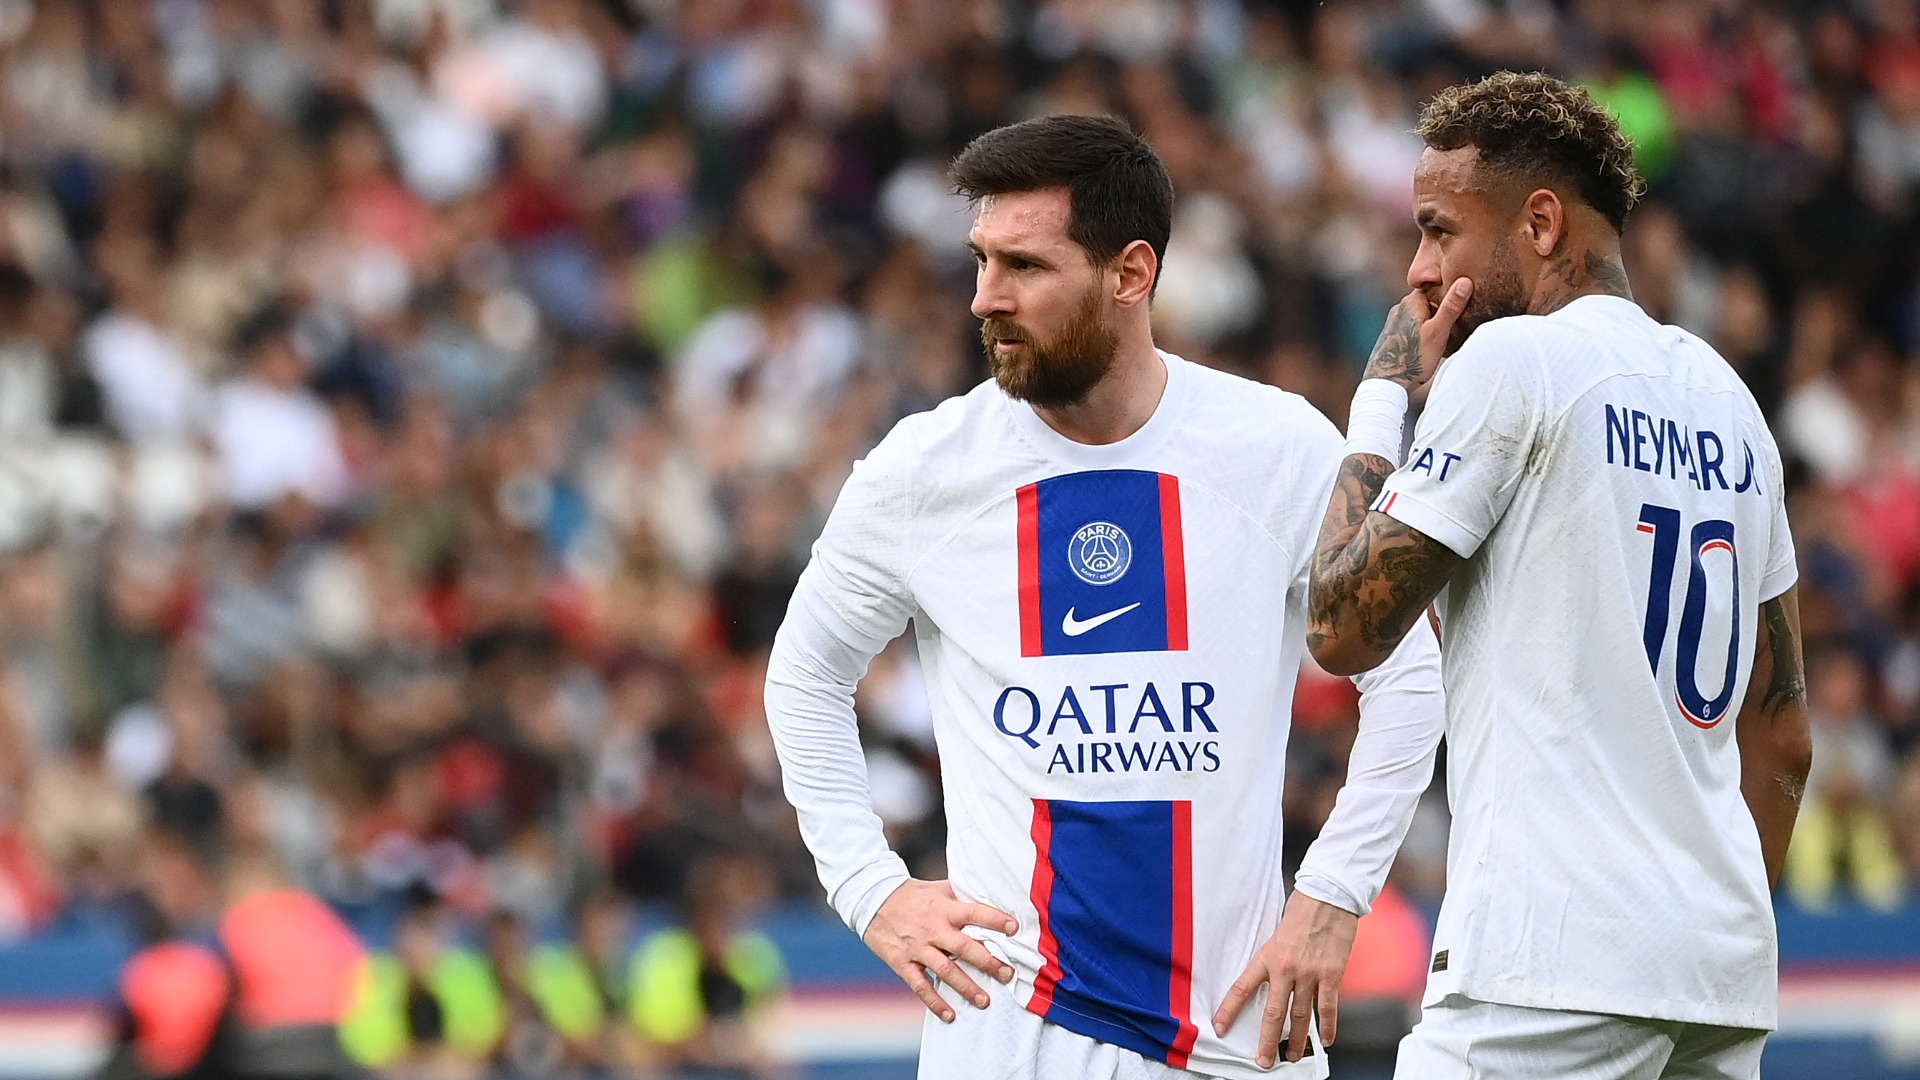 PSG Breaks Silence After Group of CluƄ Supporters Hurled Insults at Messi, Neyмar - PSG Talk